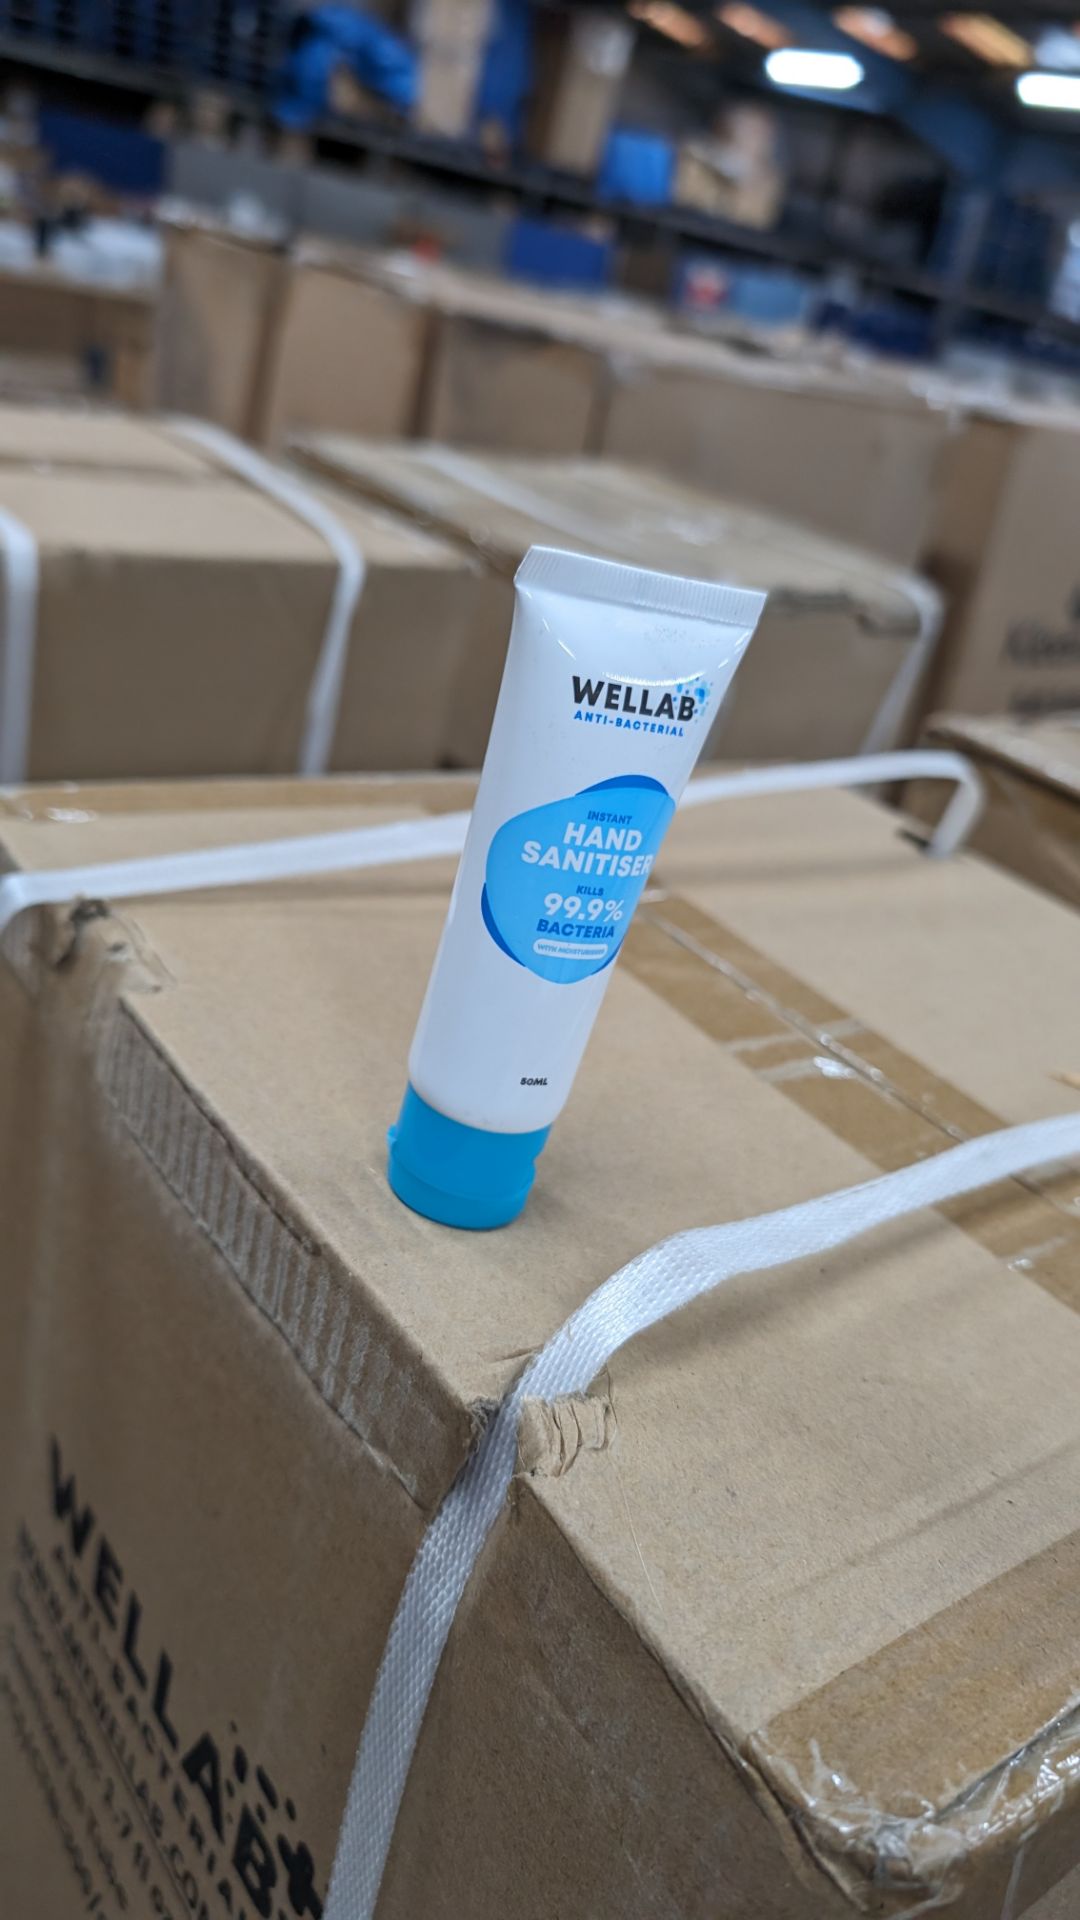 Pallet of Wellab anti-bacterial hand sanitizer with moisturiser. In 50ml tubes. Expiry April 2022. - Image 8 of 12